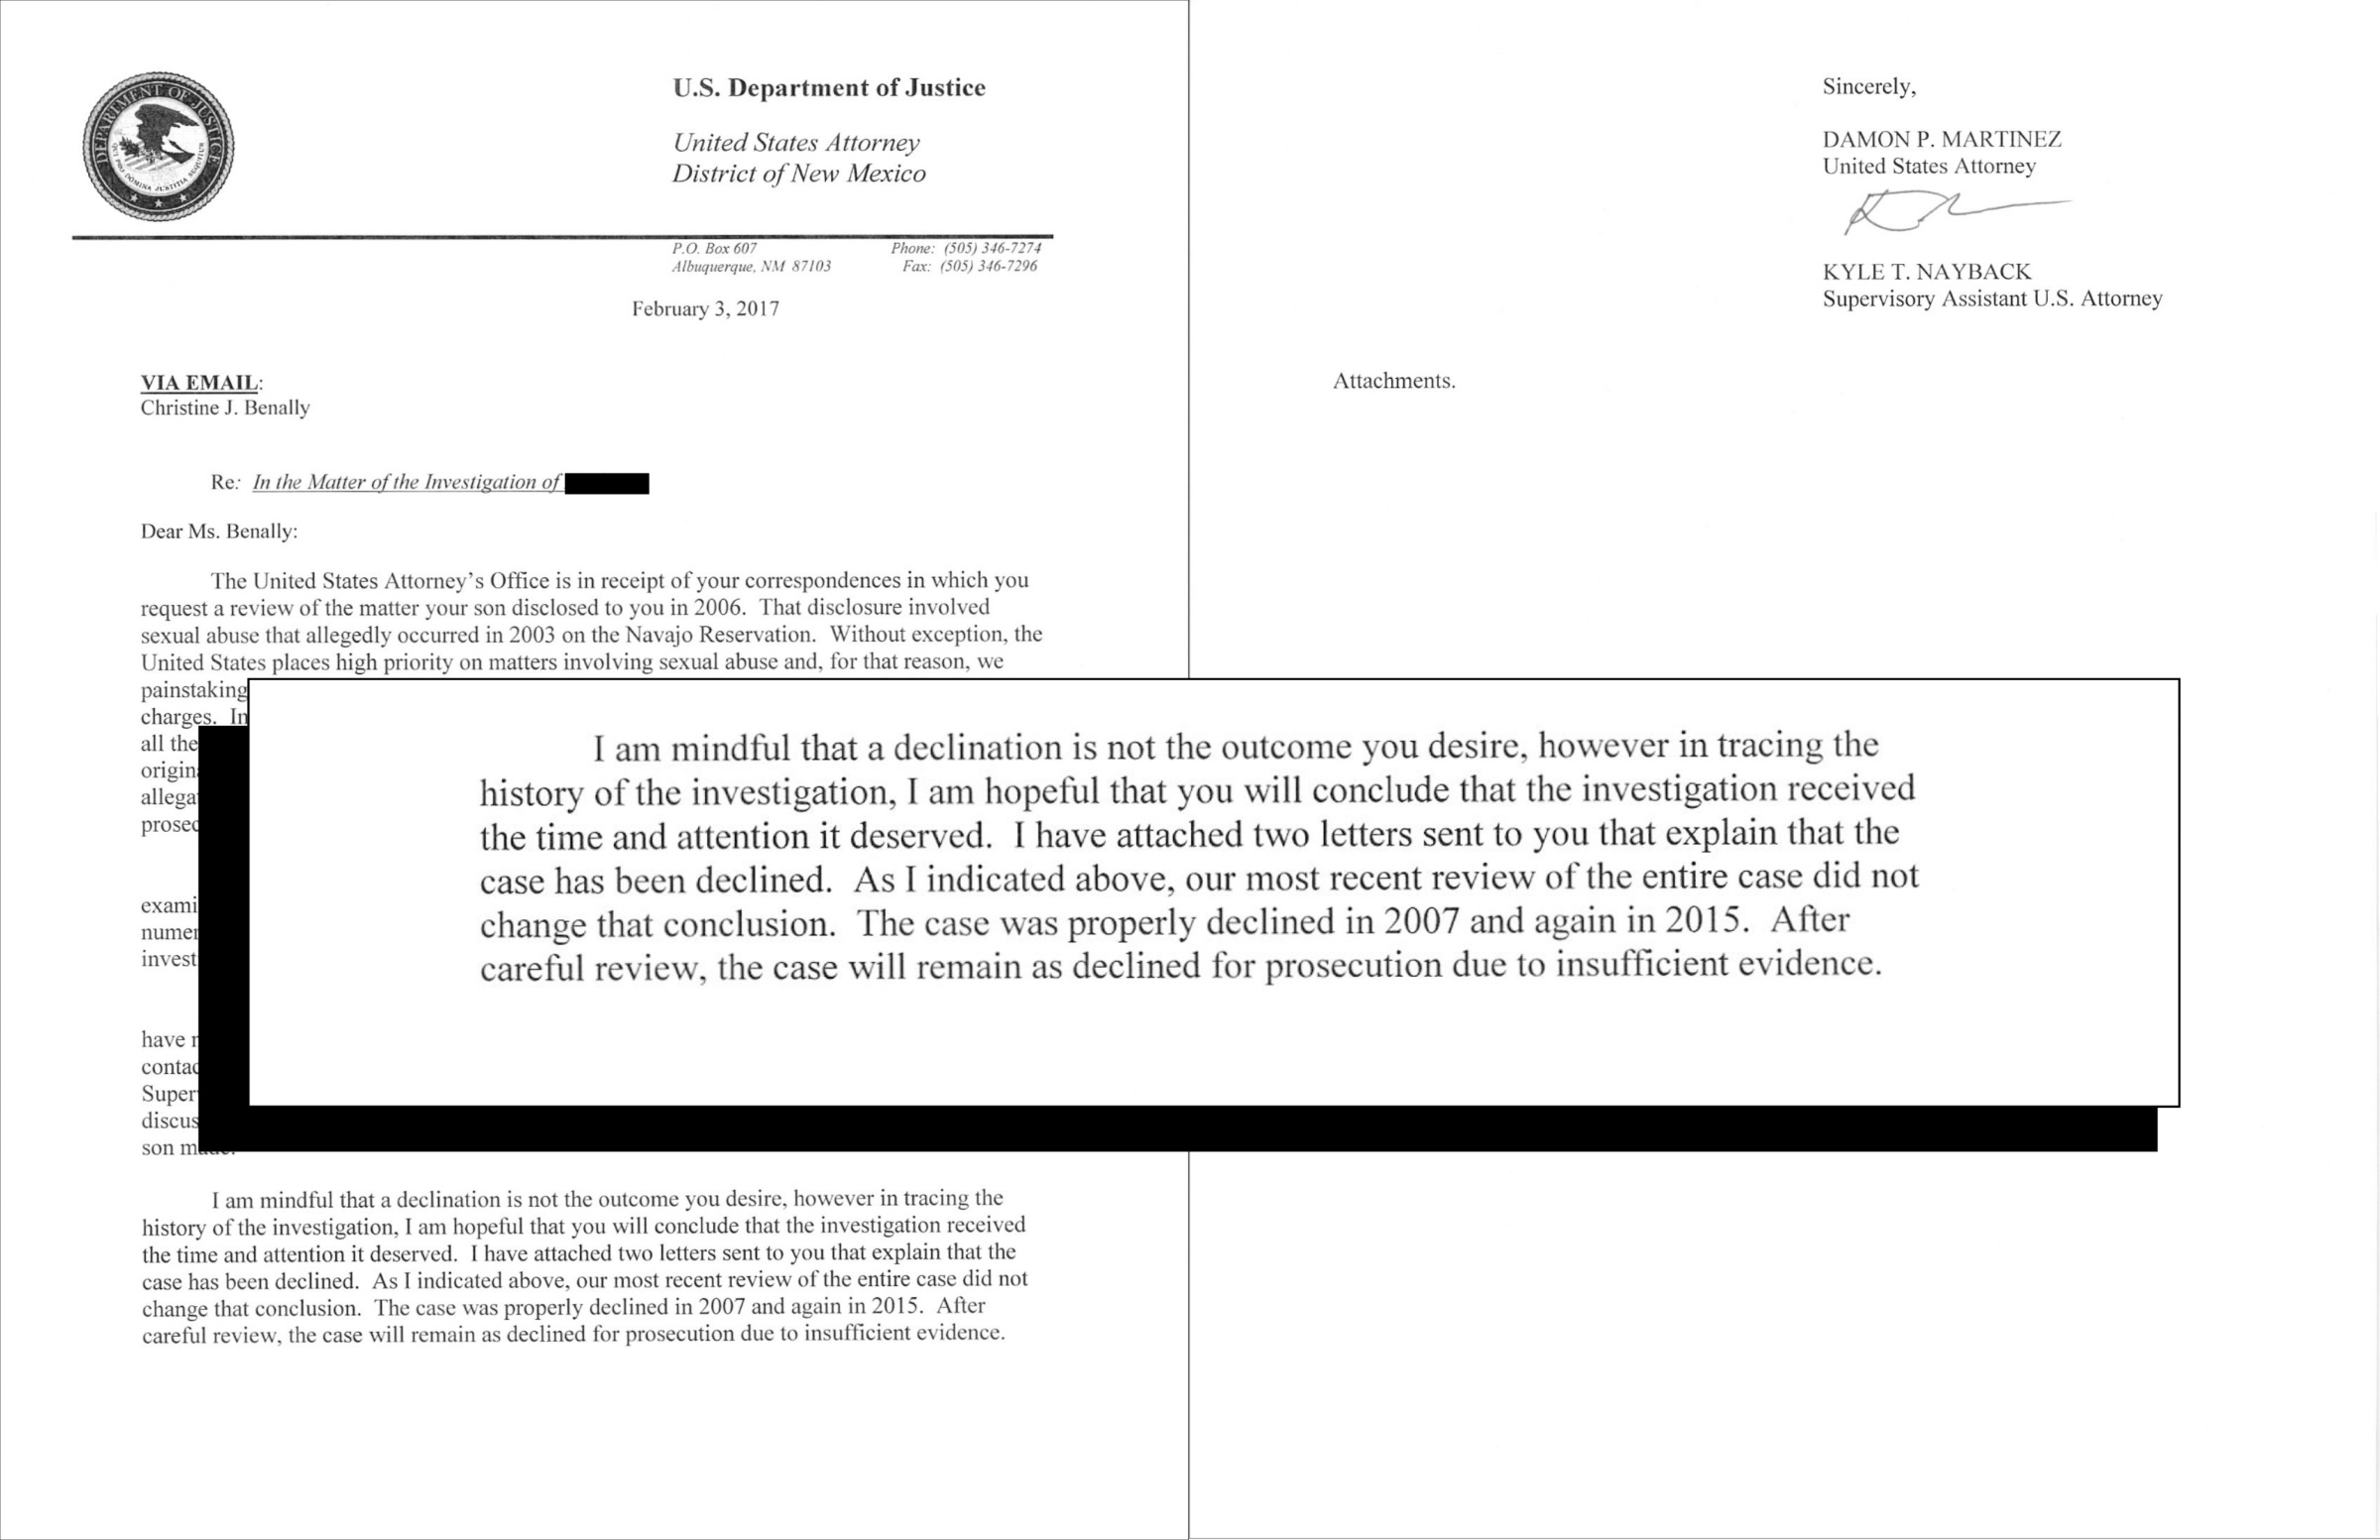 U.S. Attorney's Office Declination Letter